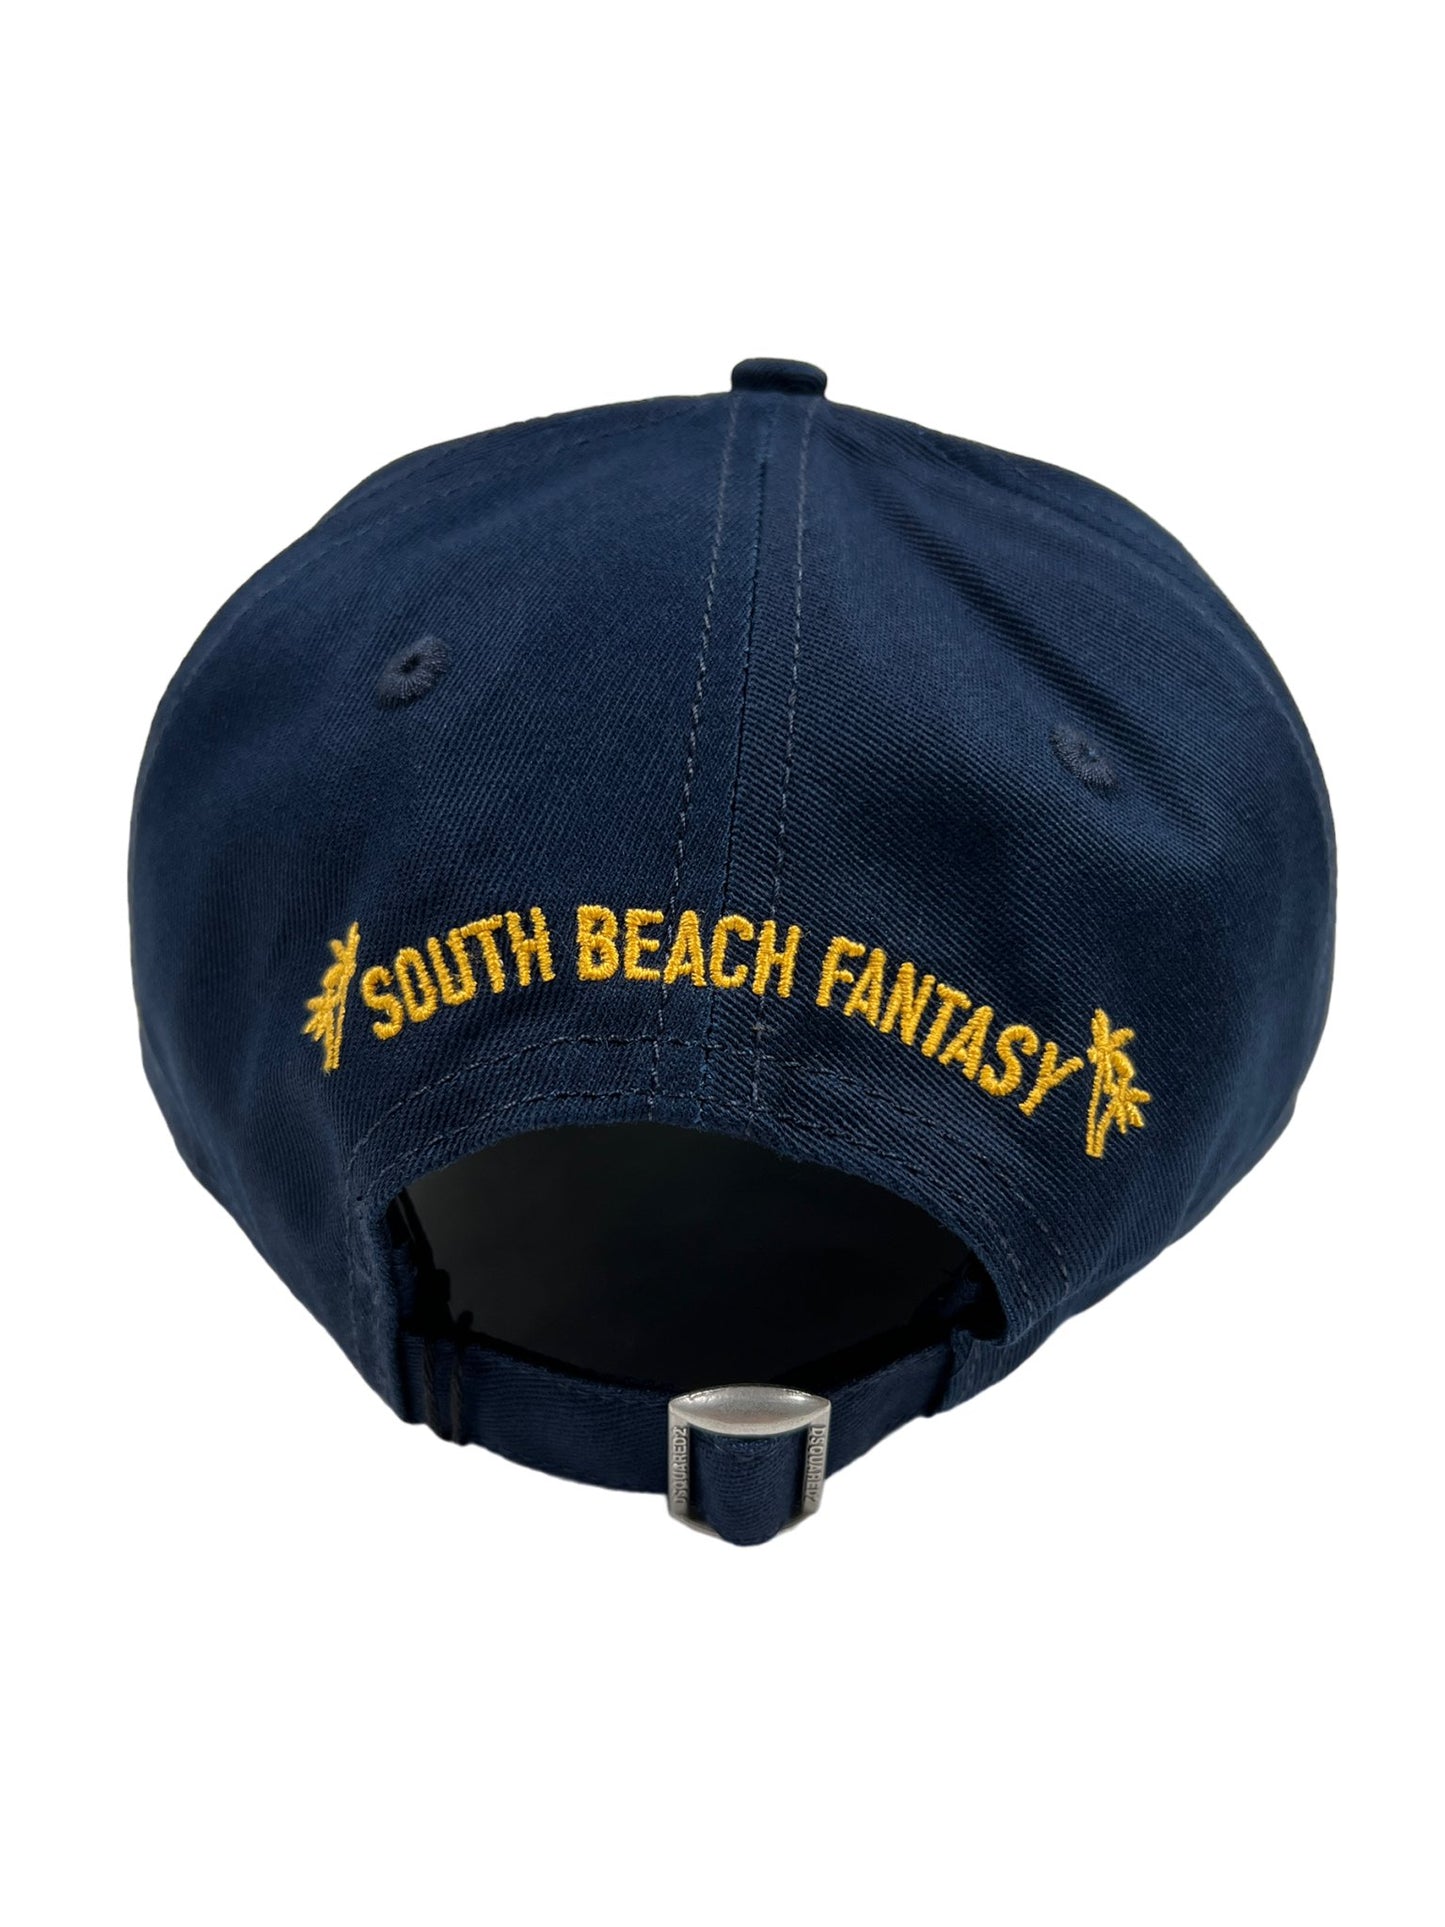 A DSQUARED2 navy blue baseball cap with the words "South Beach Fantasy" on it, perfect for any fashion enthusiast.